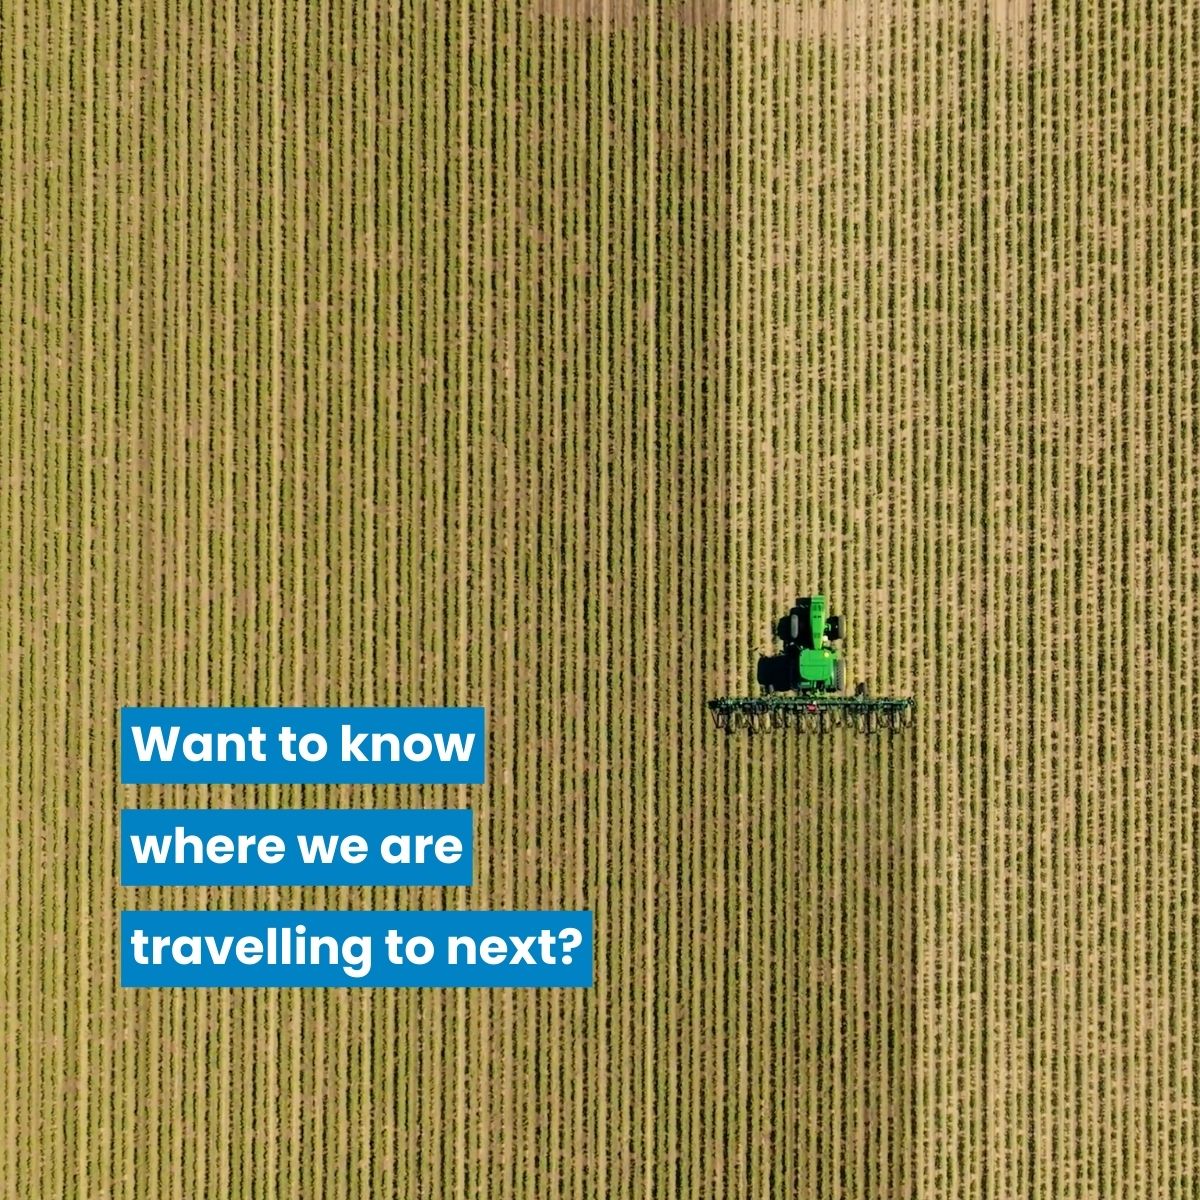 The schedule for March is taking us all over Southern Queensland and into NSW. We love travelling, but we love creating beautiful content even more!  

#cussonsmedia #agmedia #helpingagthrive #foundedinagriculture #australianag #australianfarming